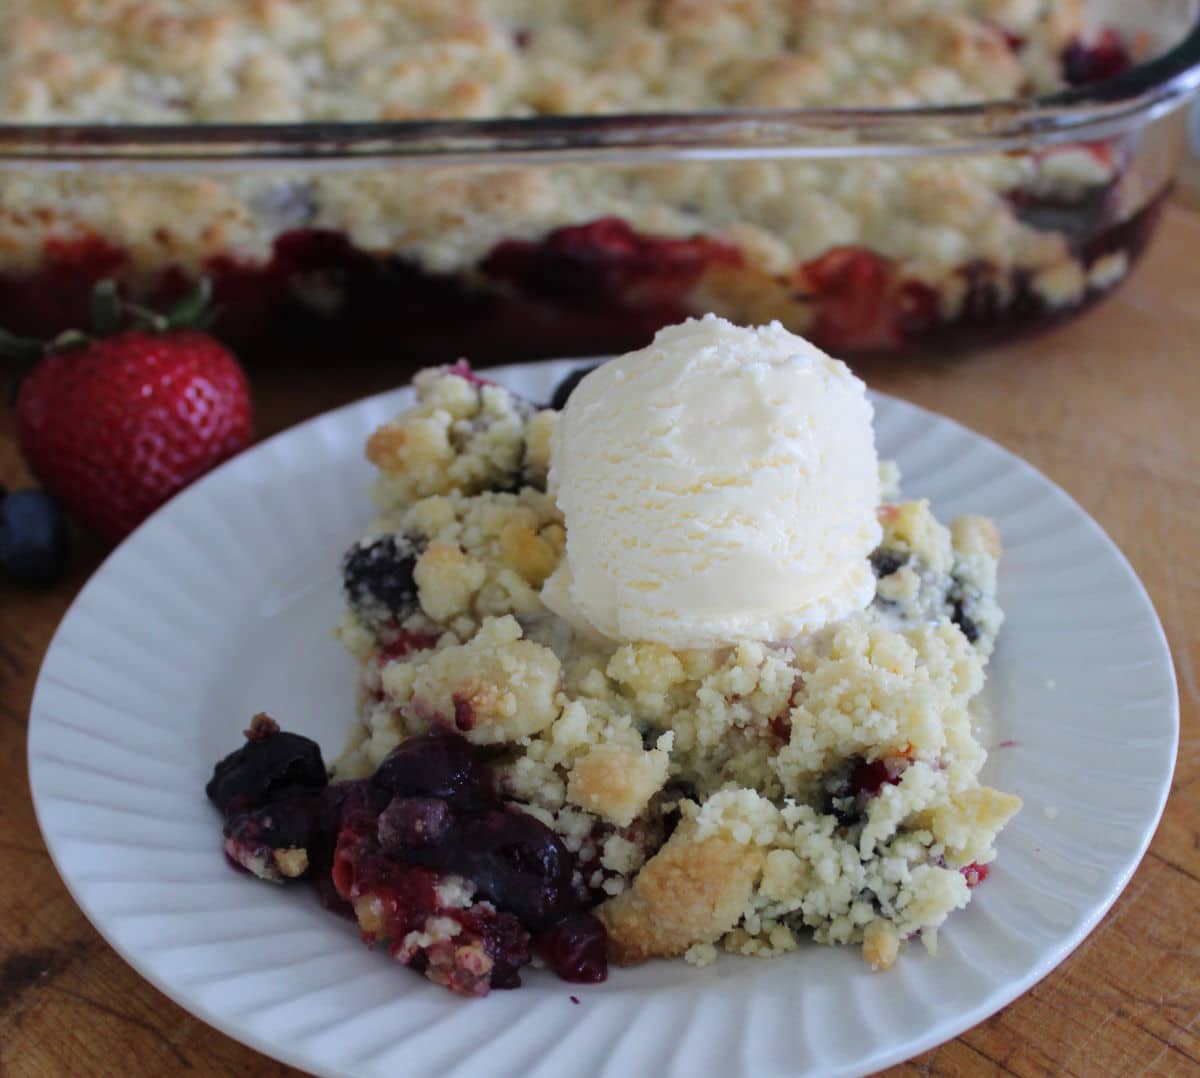 a serving of berry cobbler with a scoop of ice cream on top.